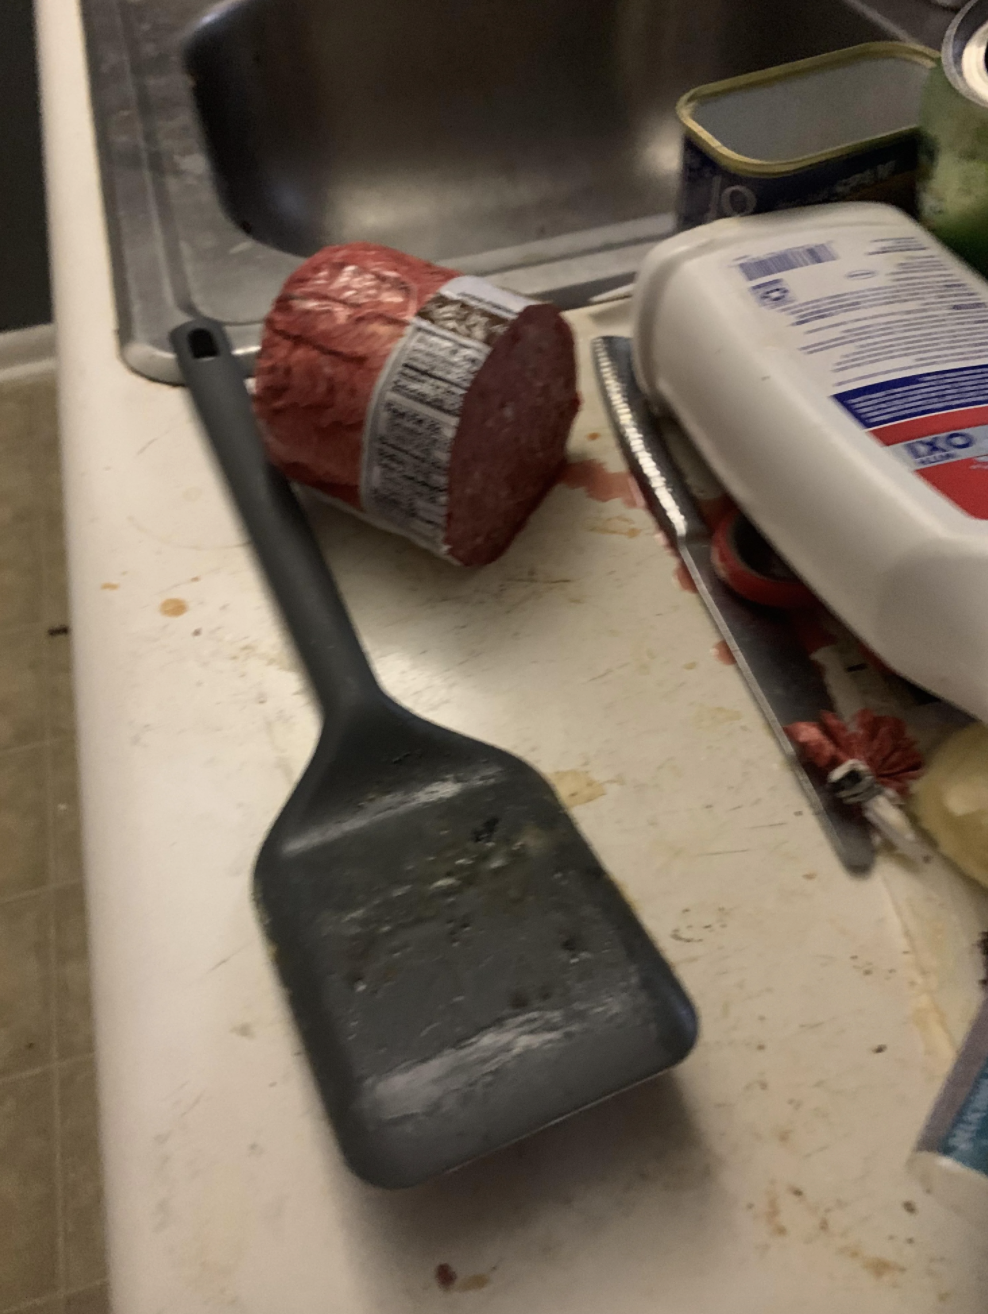 Half of raw ground beef sitting on a dirty kitchen counter